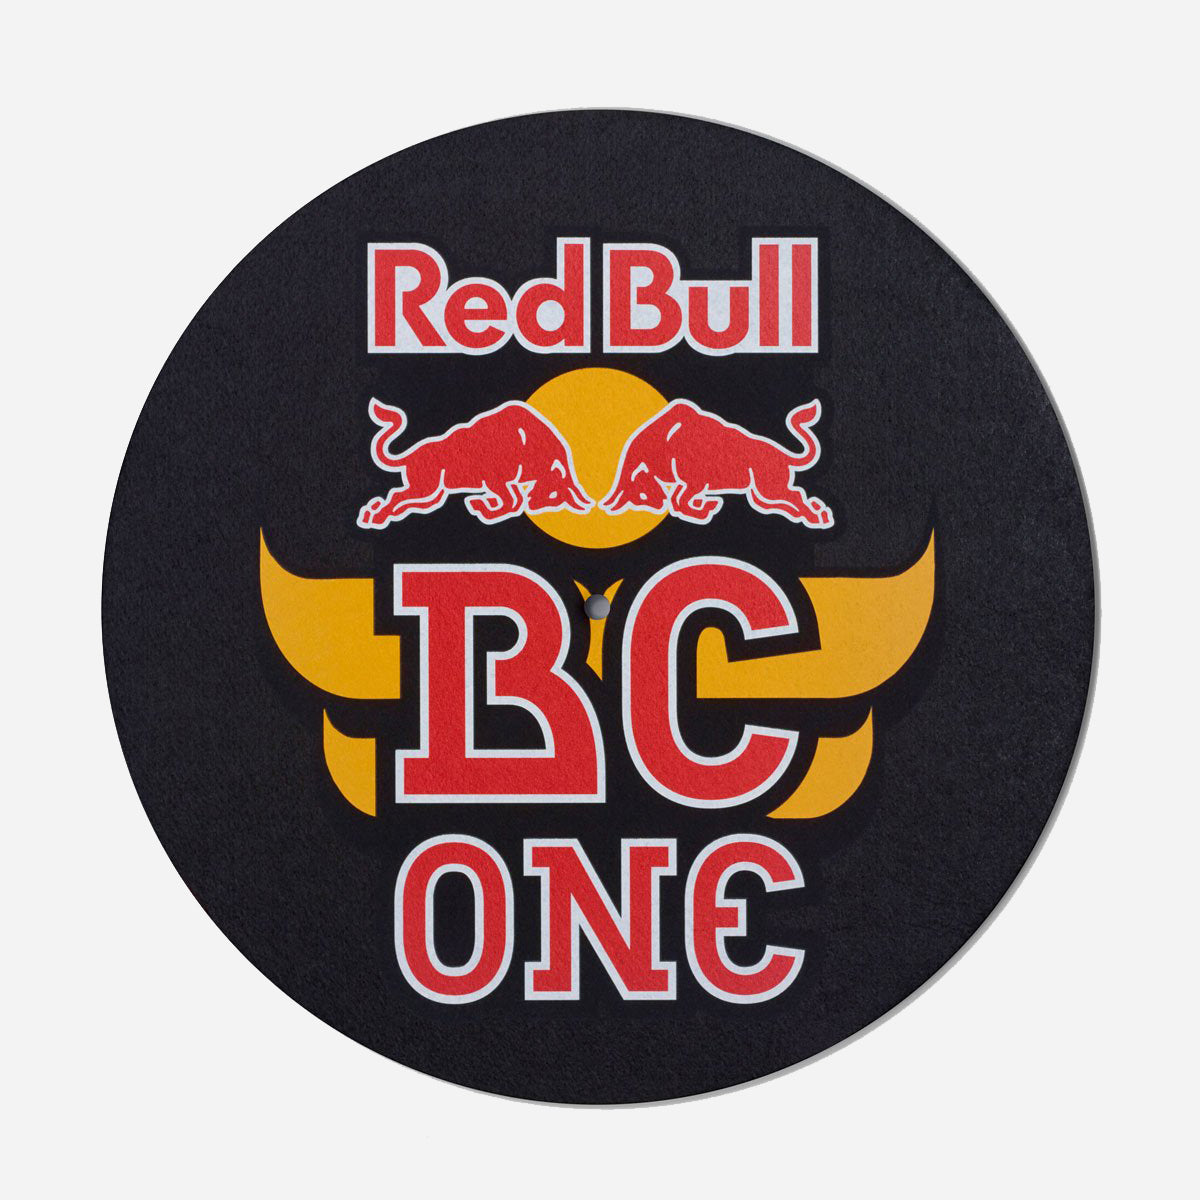 Technics SL1210MK7R Limited Edition Red Bull BC One Turntable